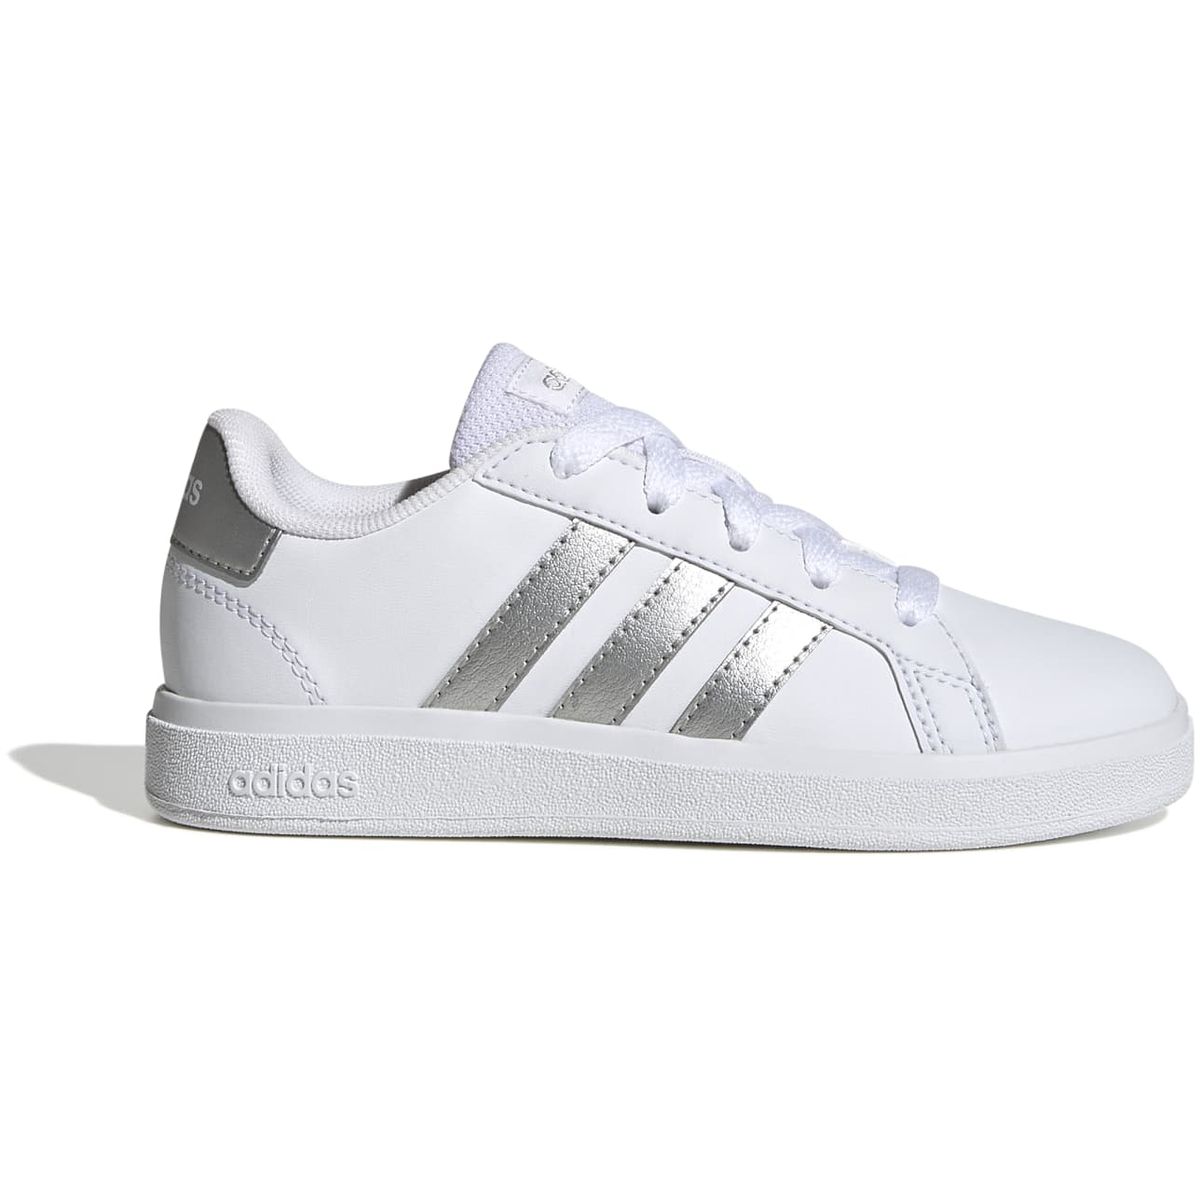 Adidas Grand Court Lifestyle Tennis Lace-Up Schuh Kinder